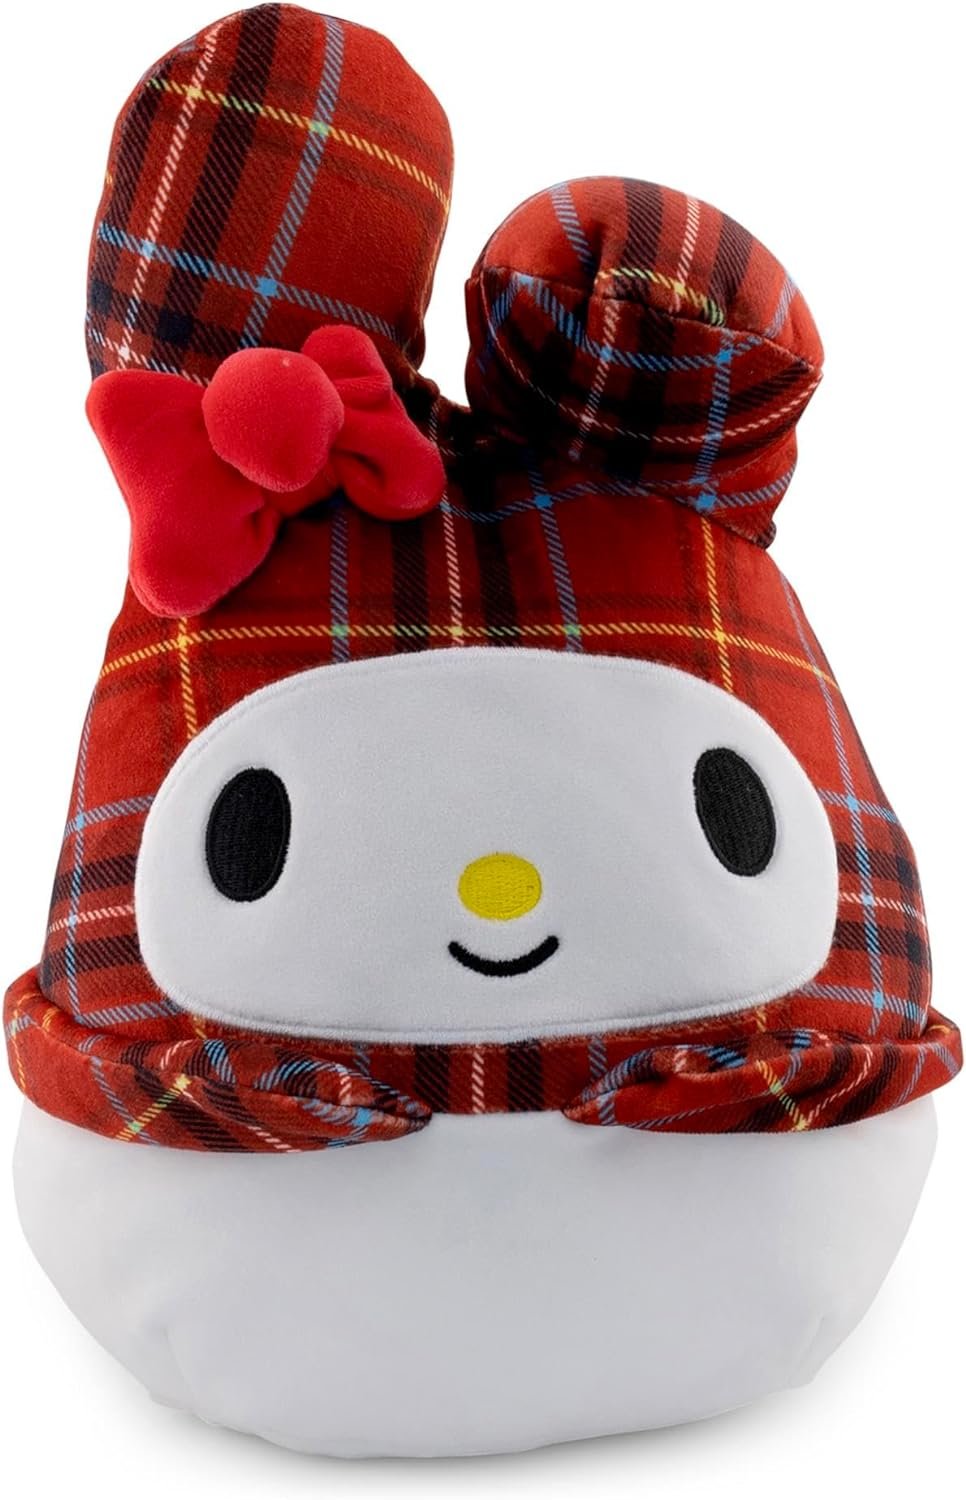 Squishmallows 8 Hello Kitty Red Plaid